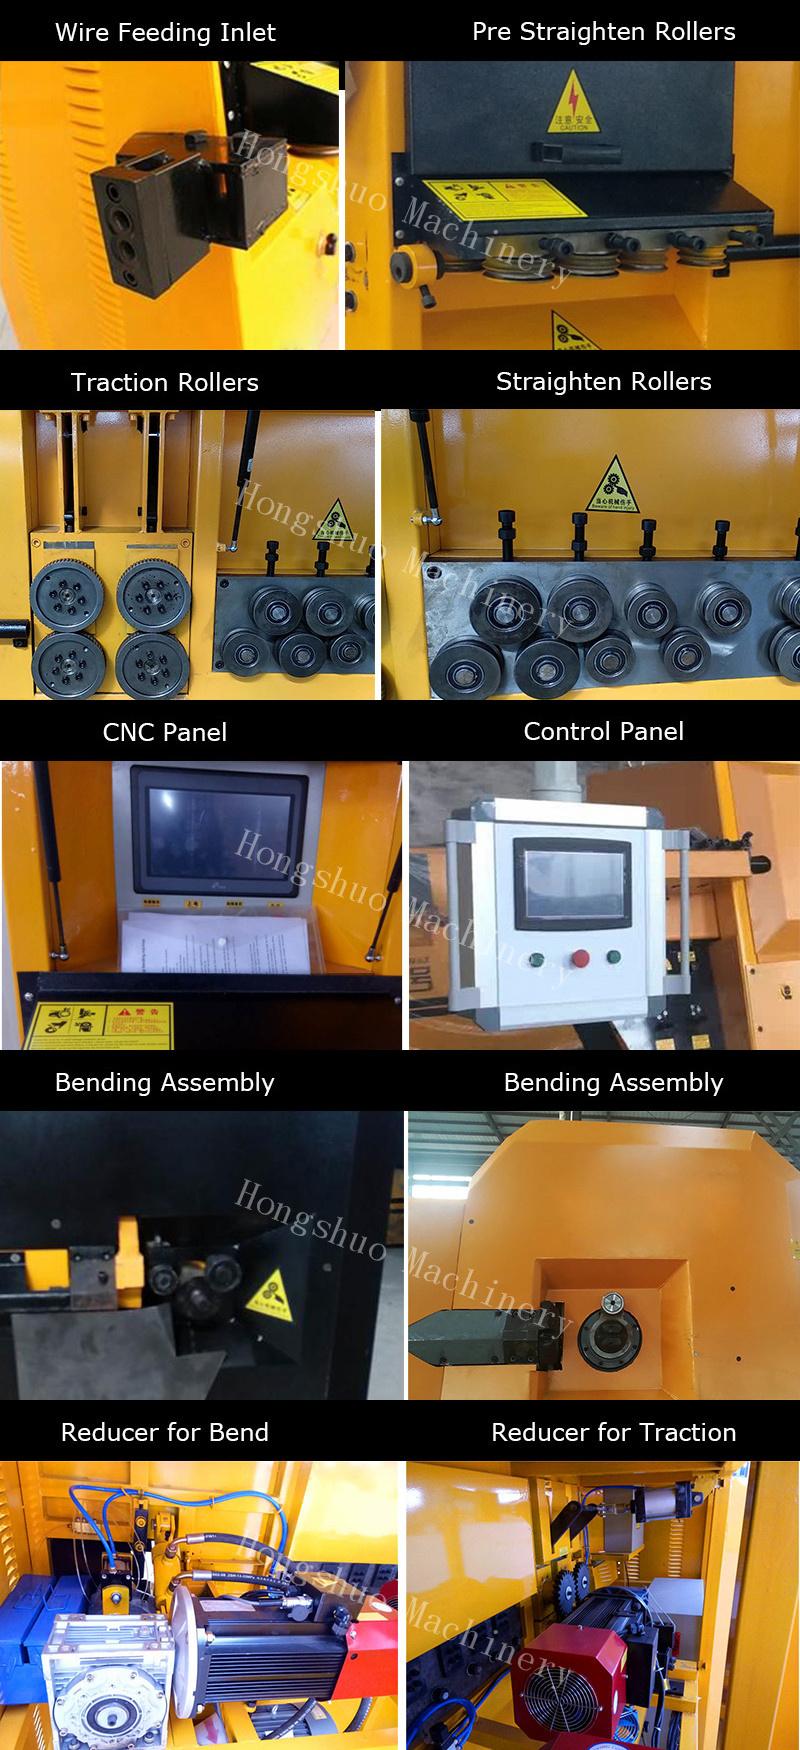 Automatic Wire Cutting Stripping Bending Tools/Automatic Bar Bender, Latest Design Runs Smoothy/Angle Bar Bending Machine